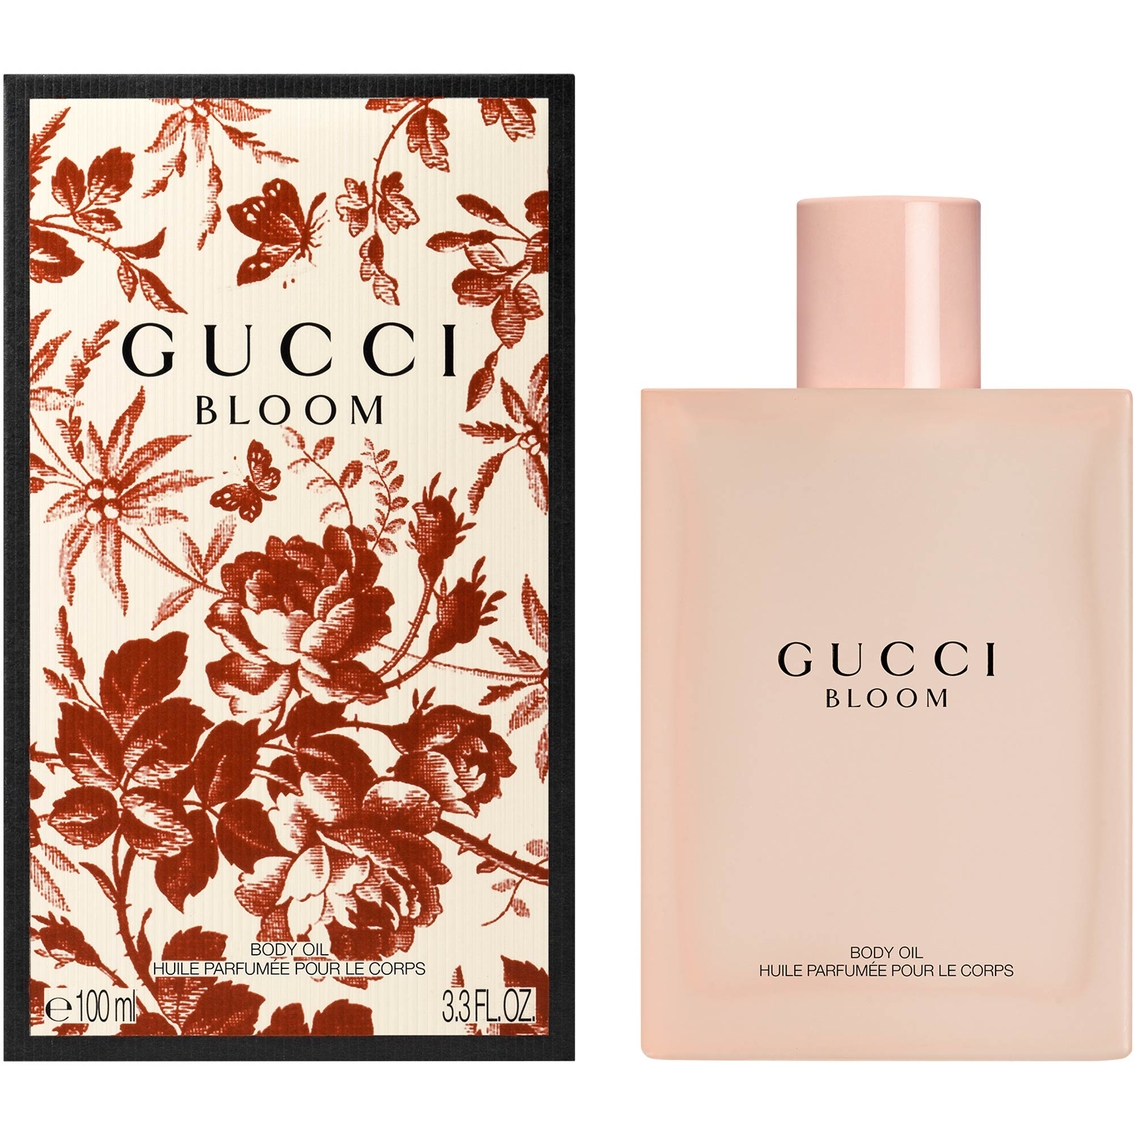 Gucci Bloom Body Oil 3.3 oz. - Image 2 of 2